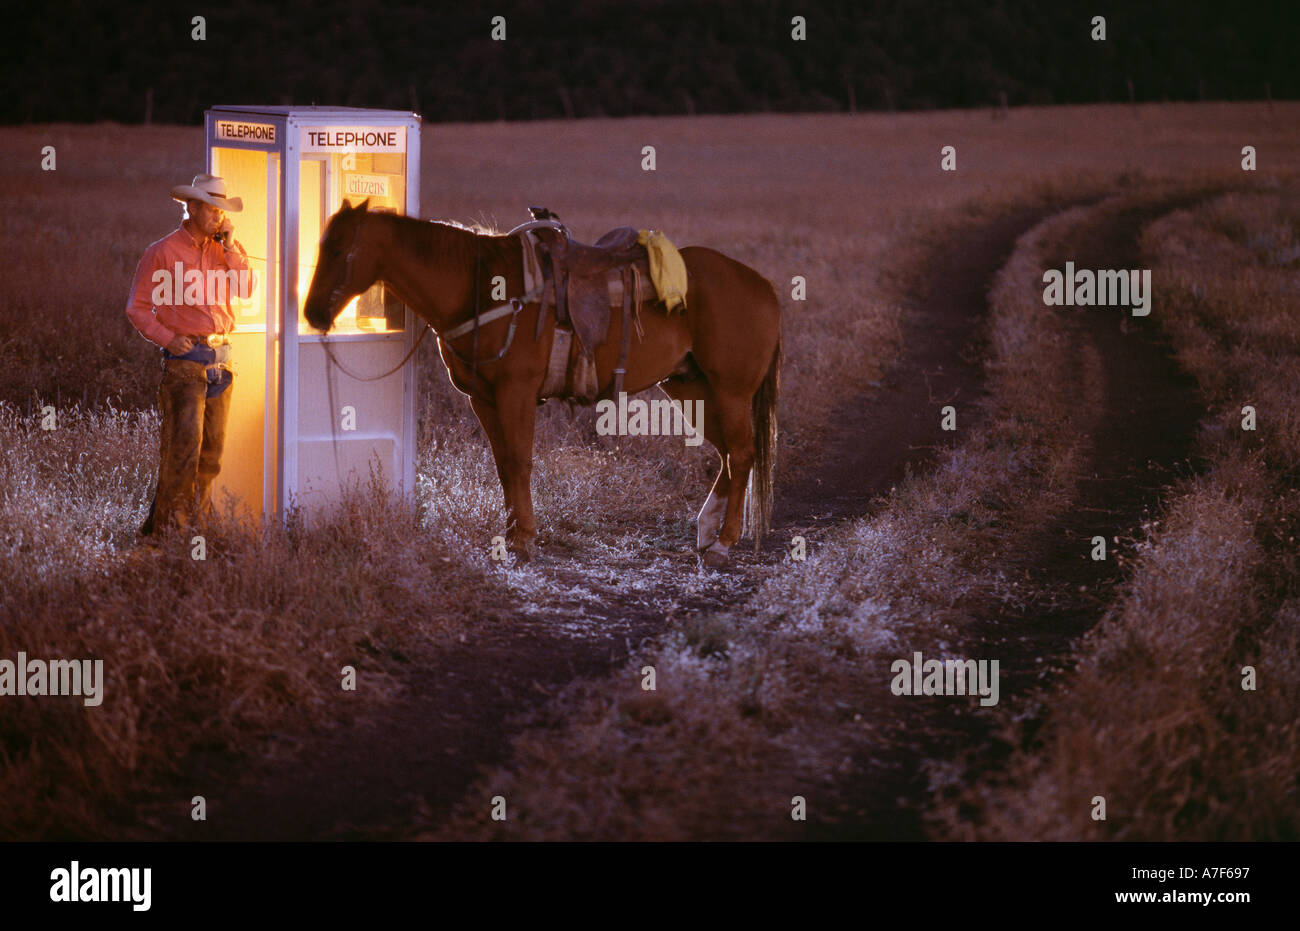 Cowboy makes a telephone call in remote rural area Stock Photo